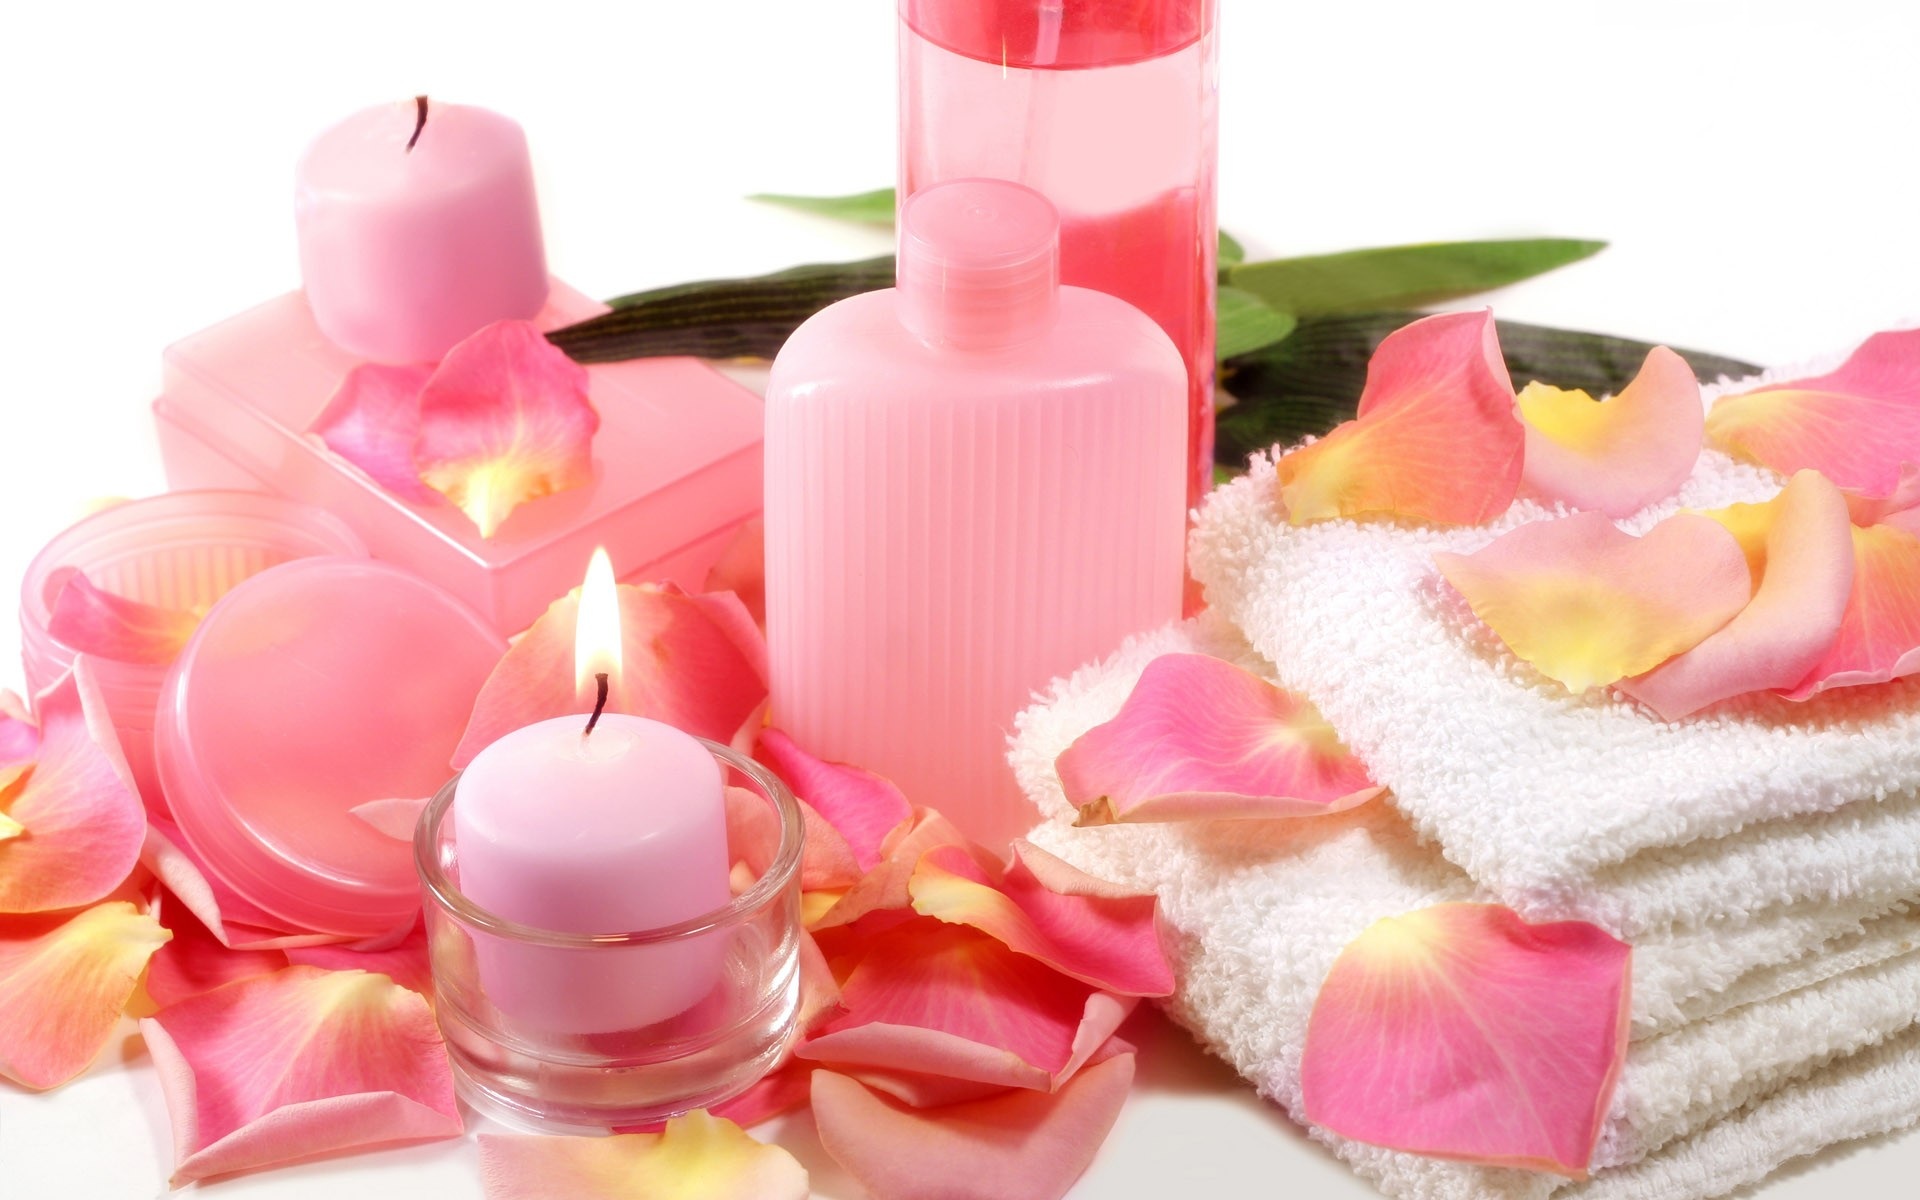 man made, spa, candle, petal, pink, still life, towel wallpaper for mobile